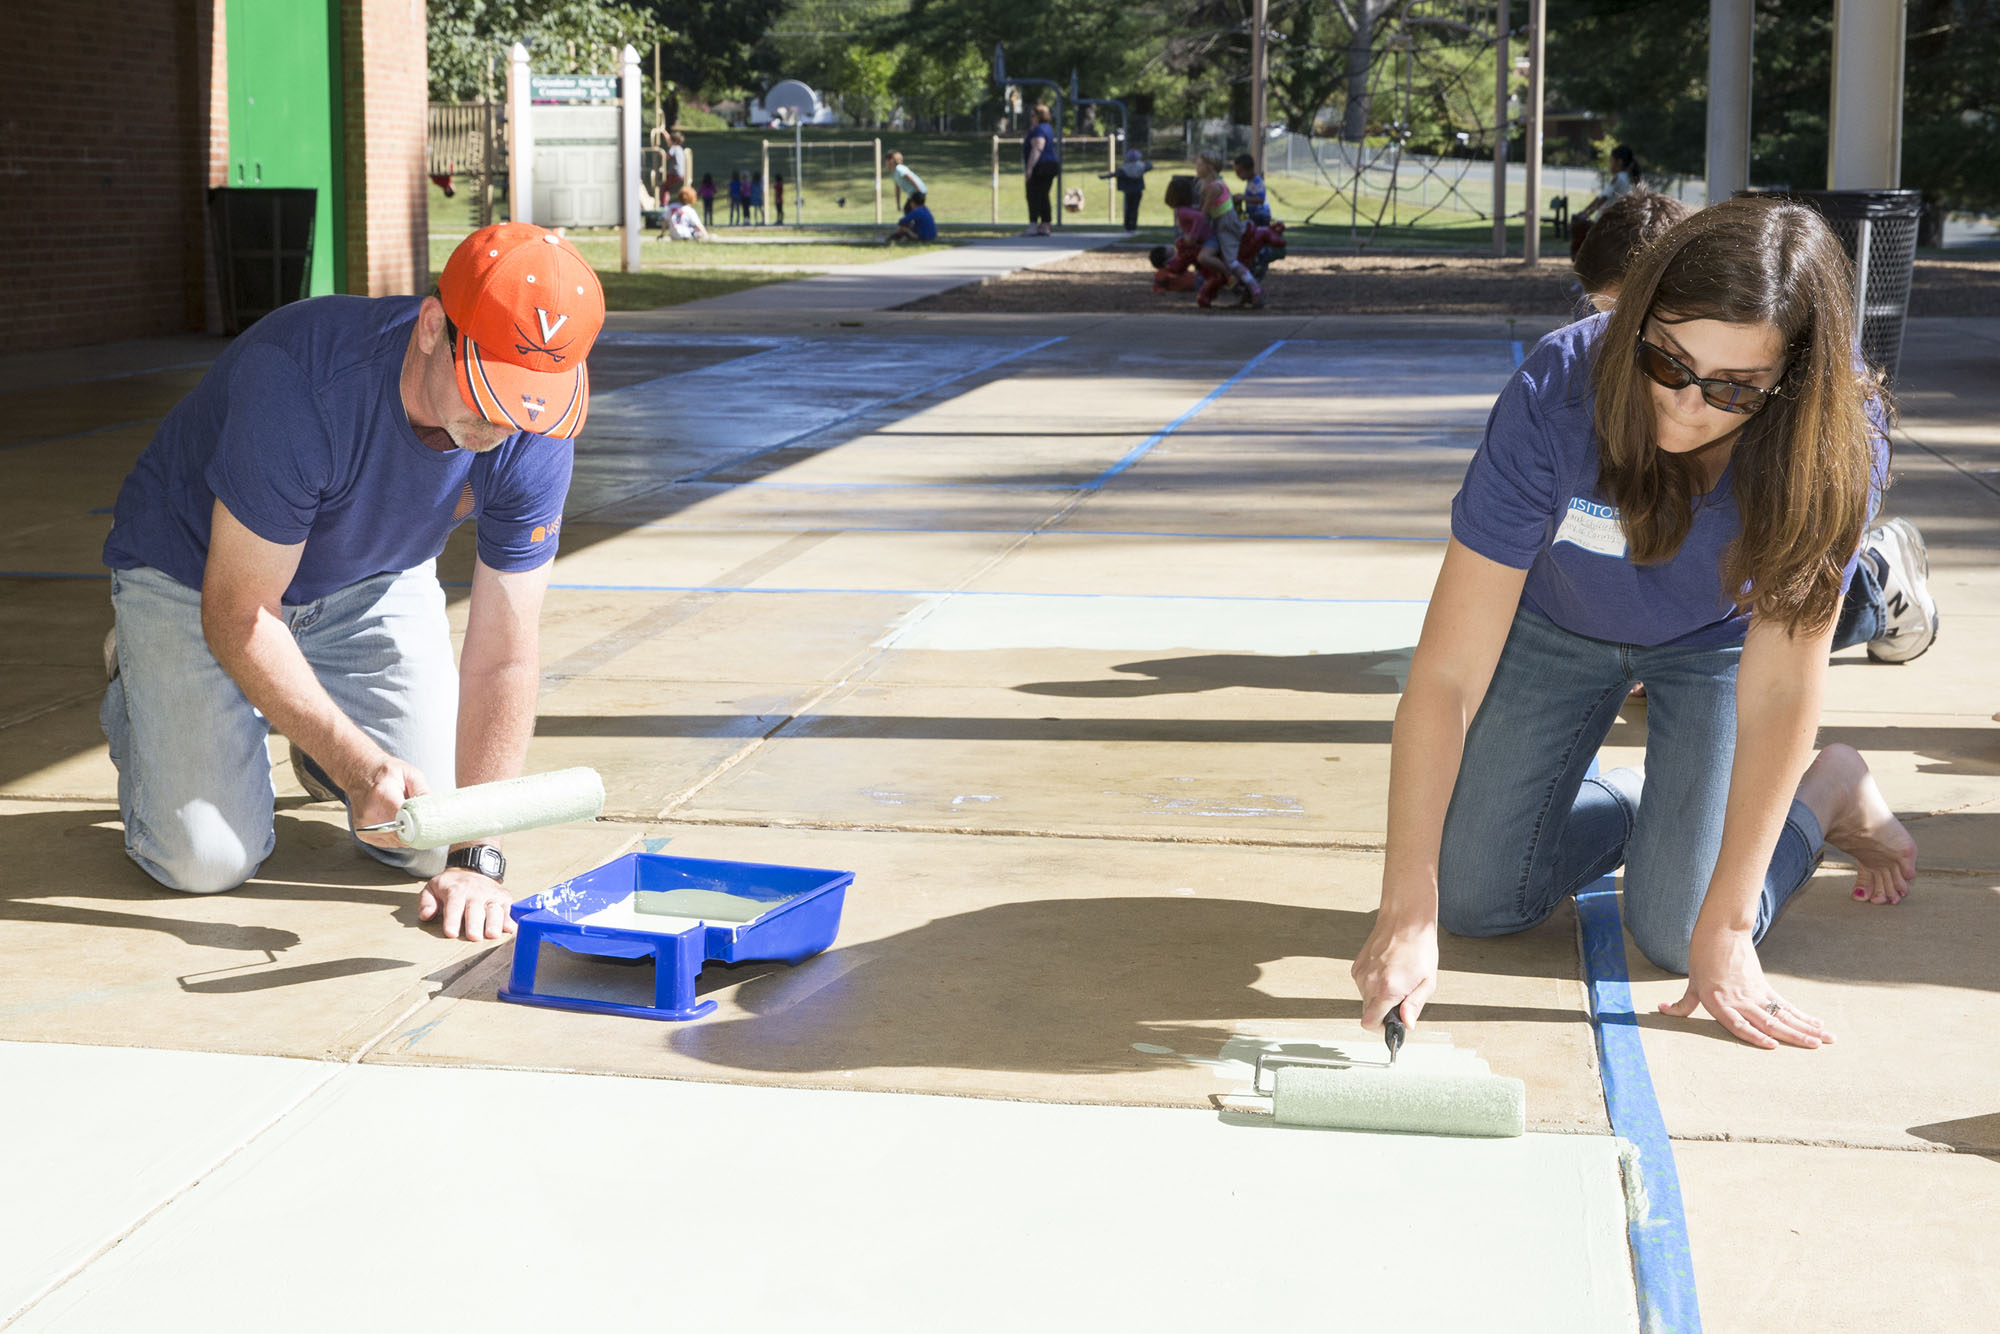 Employees from the College of Arts &amp; Sciences paint a huge game board on a concrete slab at Greenbrier Elementary School.